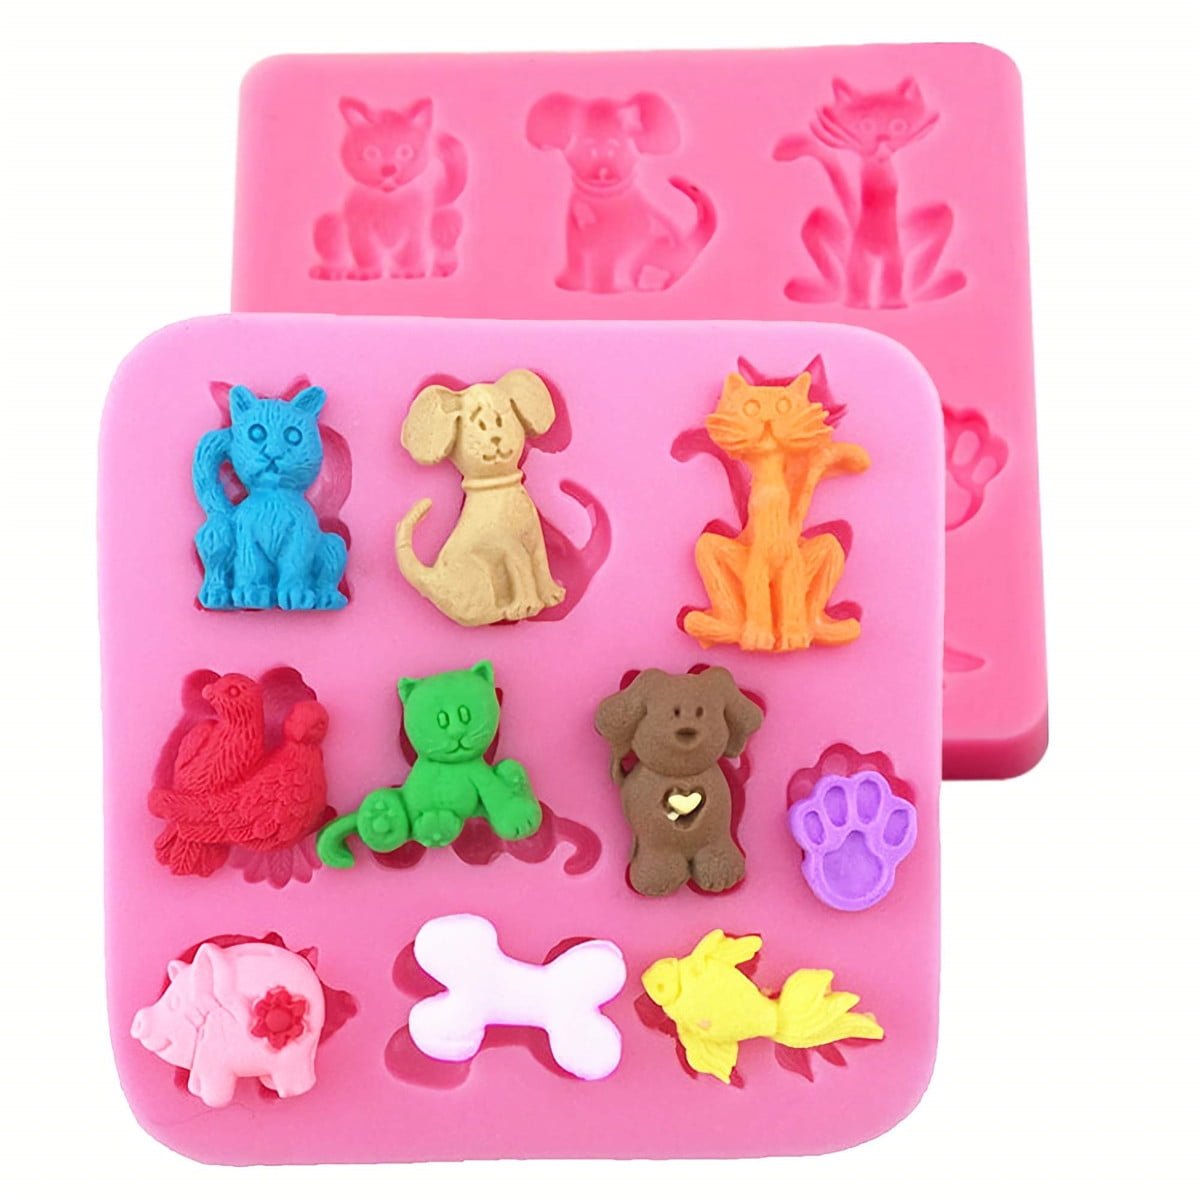 paw bone mold DIY Fondant chocolate Cake Biscuit silicone Decoration Modeling Tool Handmade Silicone Mold